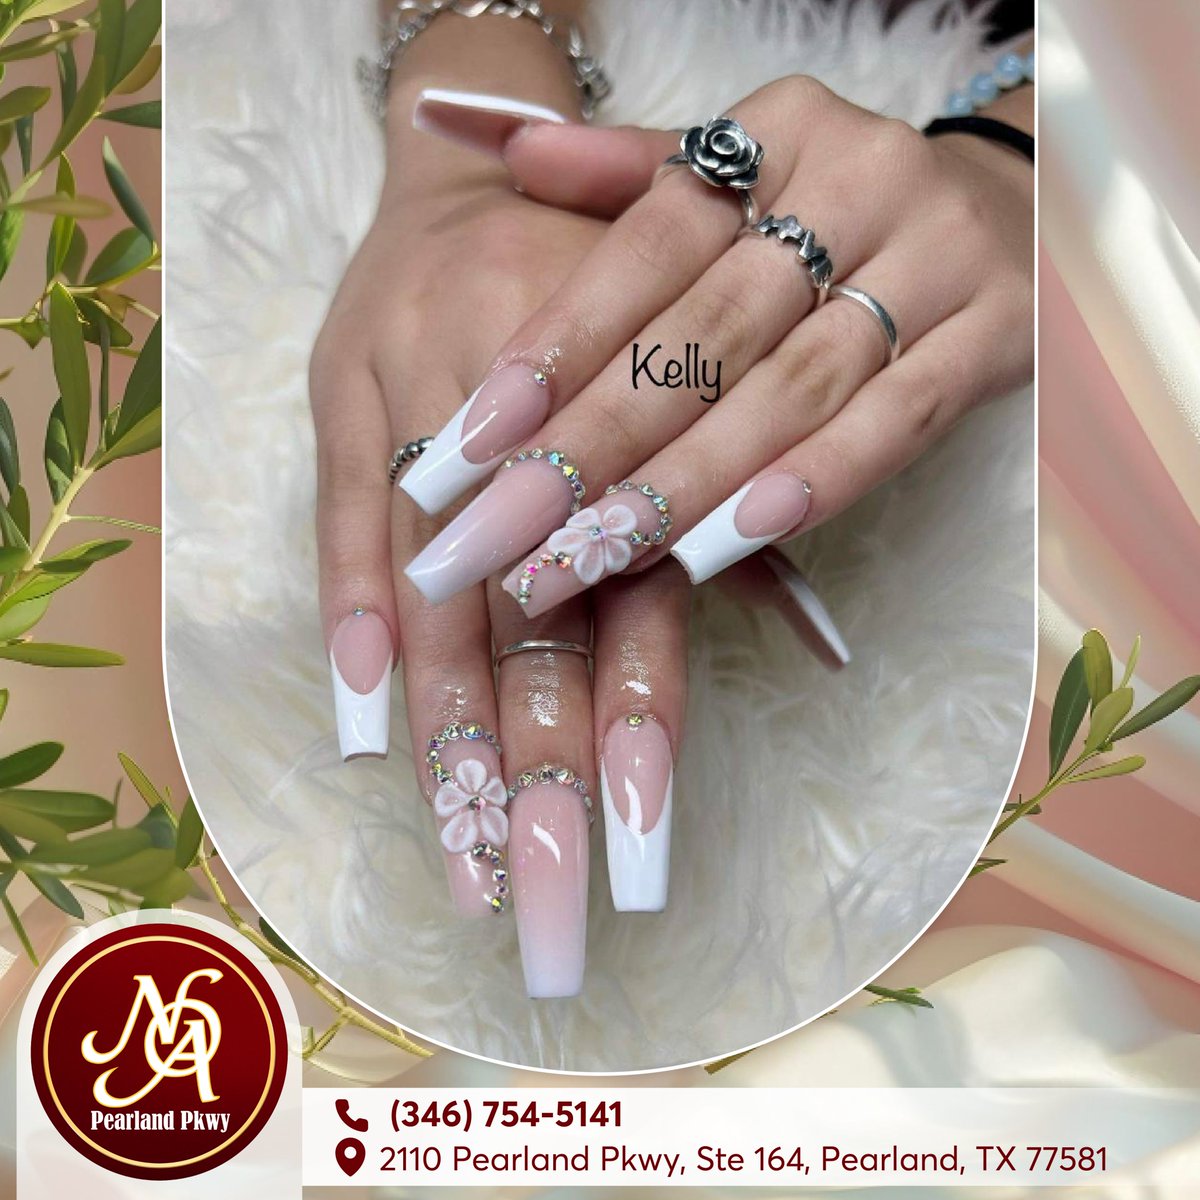 These nails are a reminder to embrace the beauty that surrounds us. 🌺
#nailsofamerica #nailsofamericapearland #nailsalonspearland #manicure #pedicure #spapearland #nailpolish #naillover #nailworld #NailStyle #nailfashion